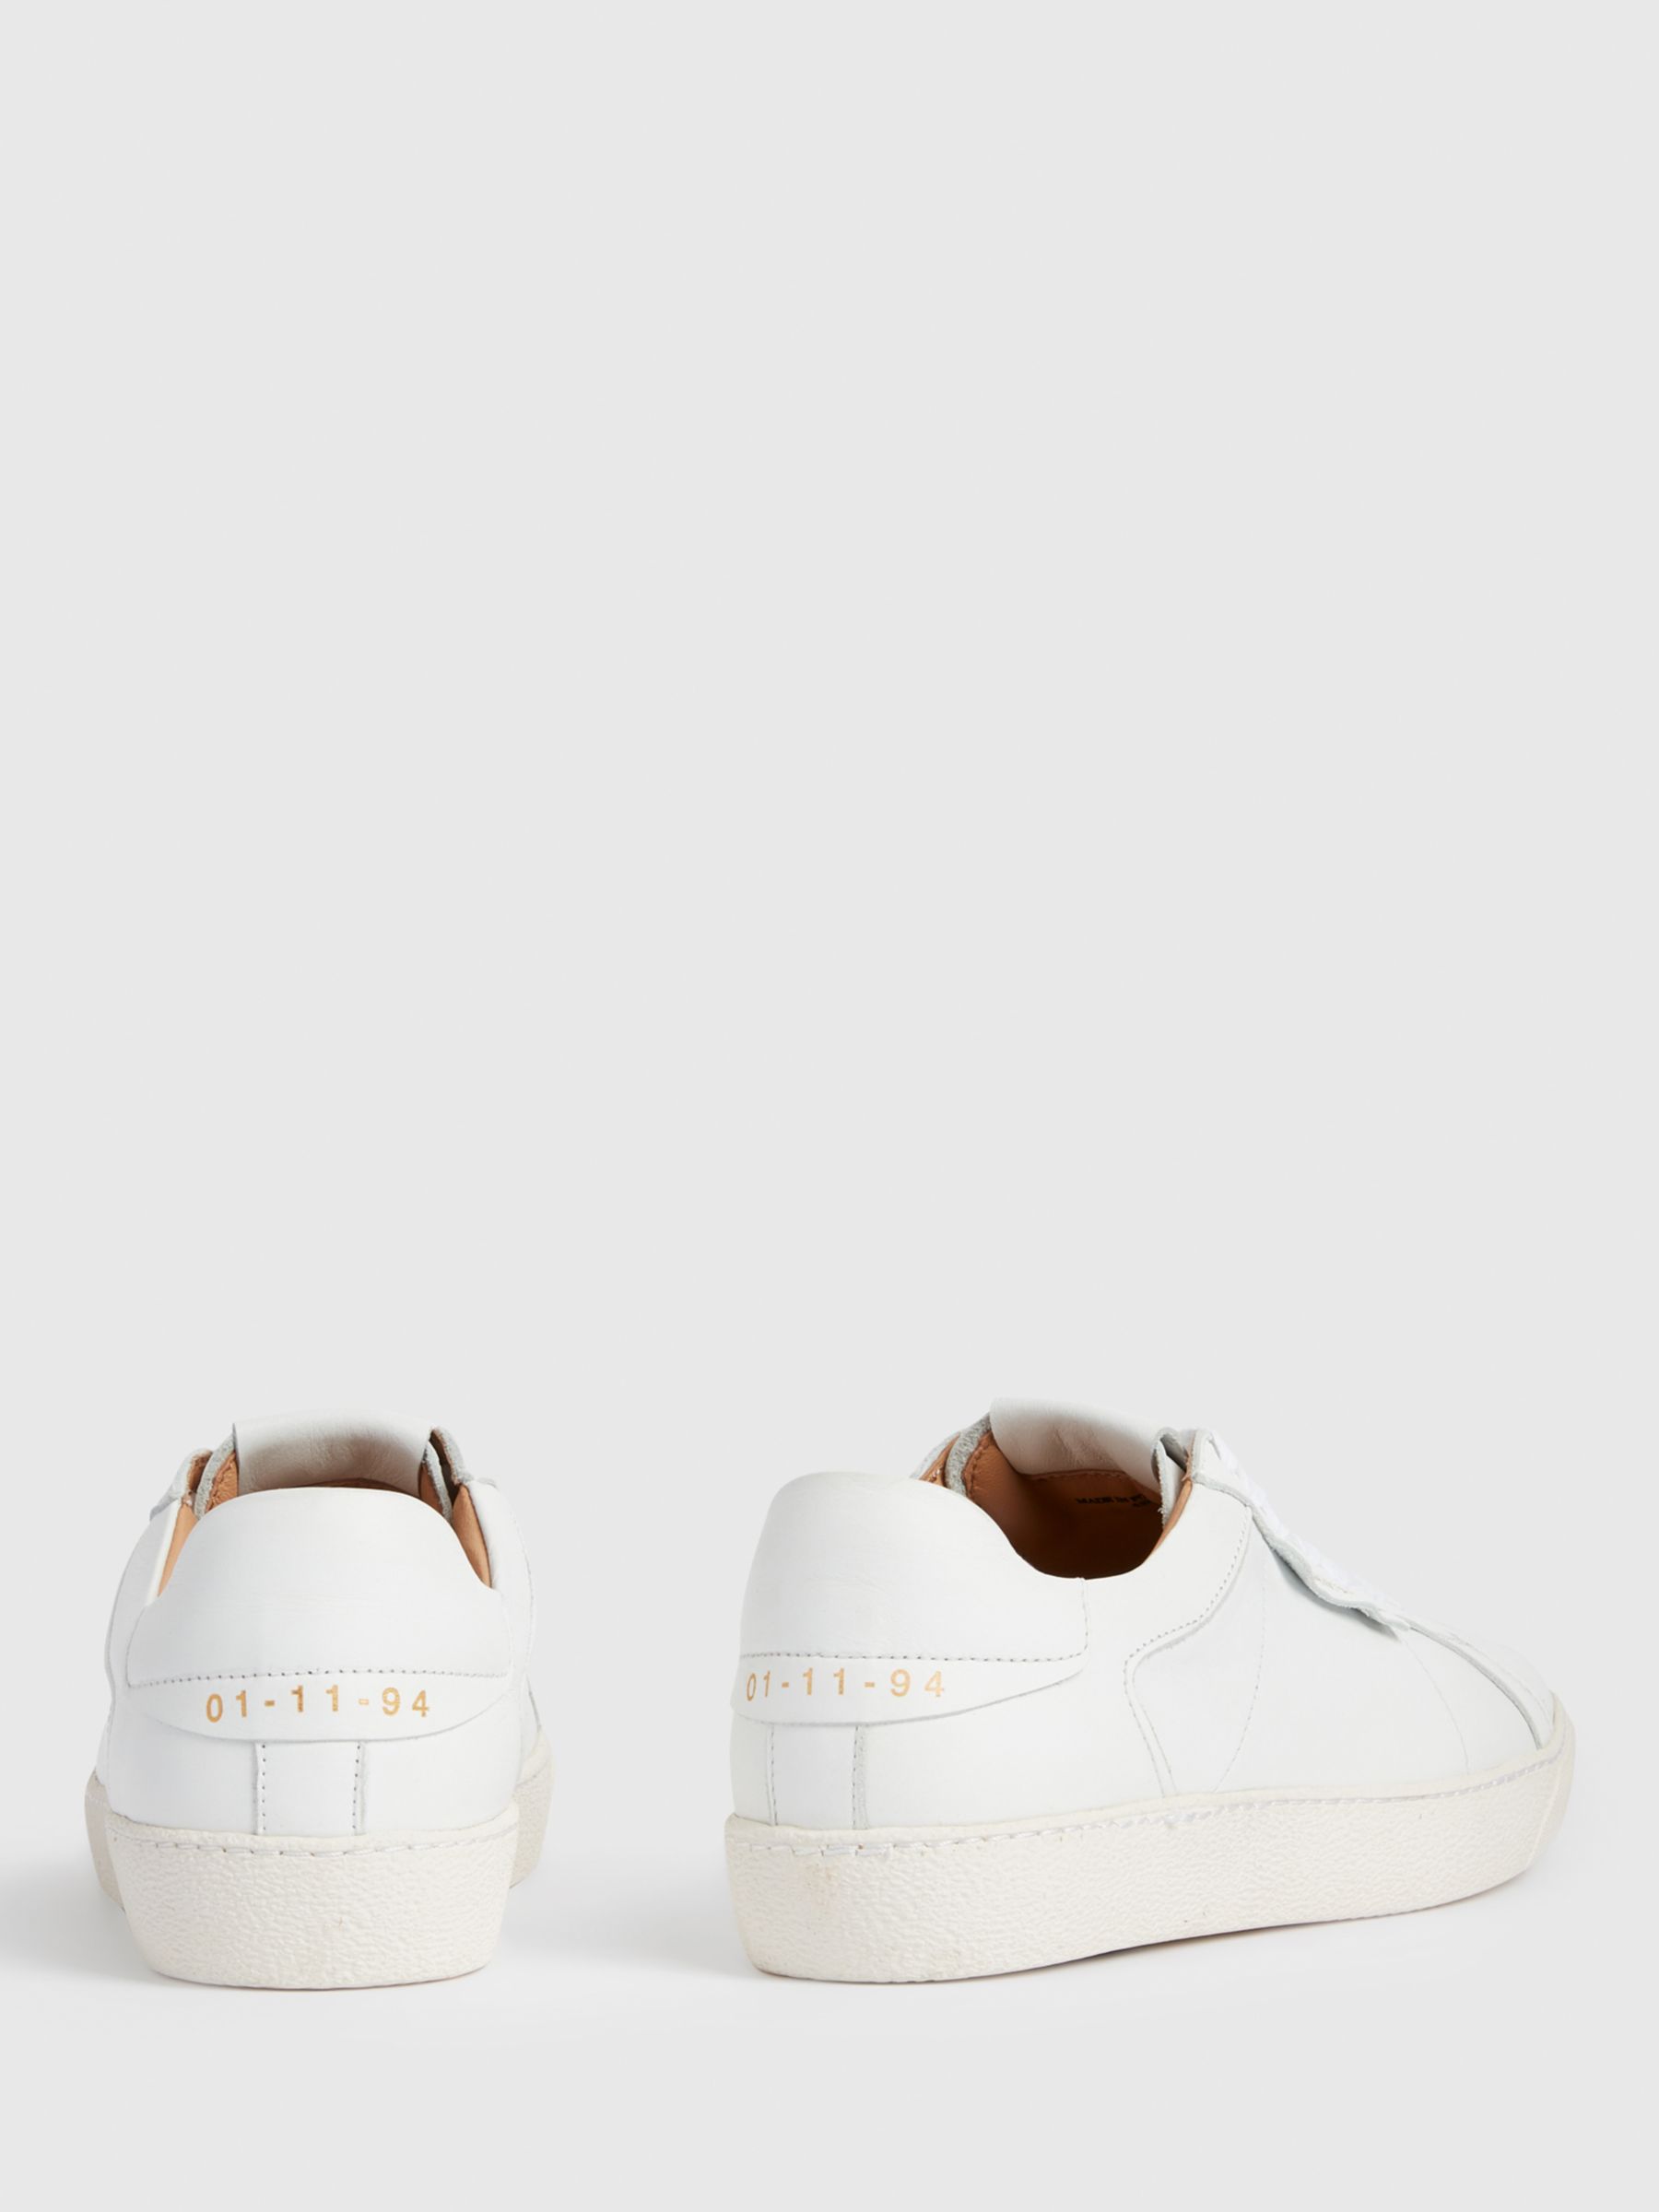 AllSaints Sheer Low Top Leather Trainers, White, 5